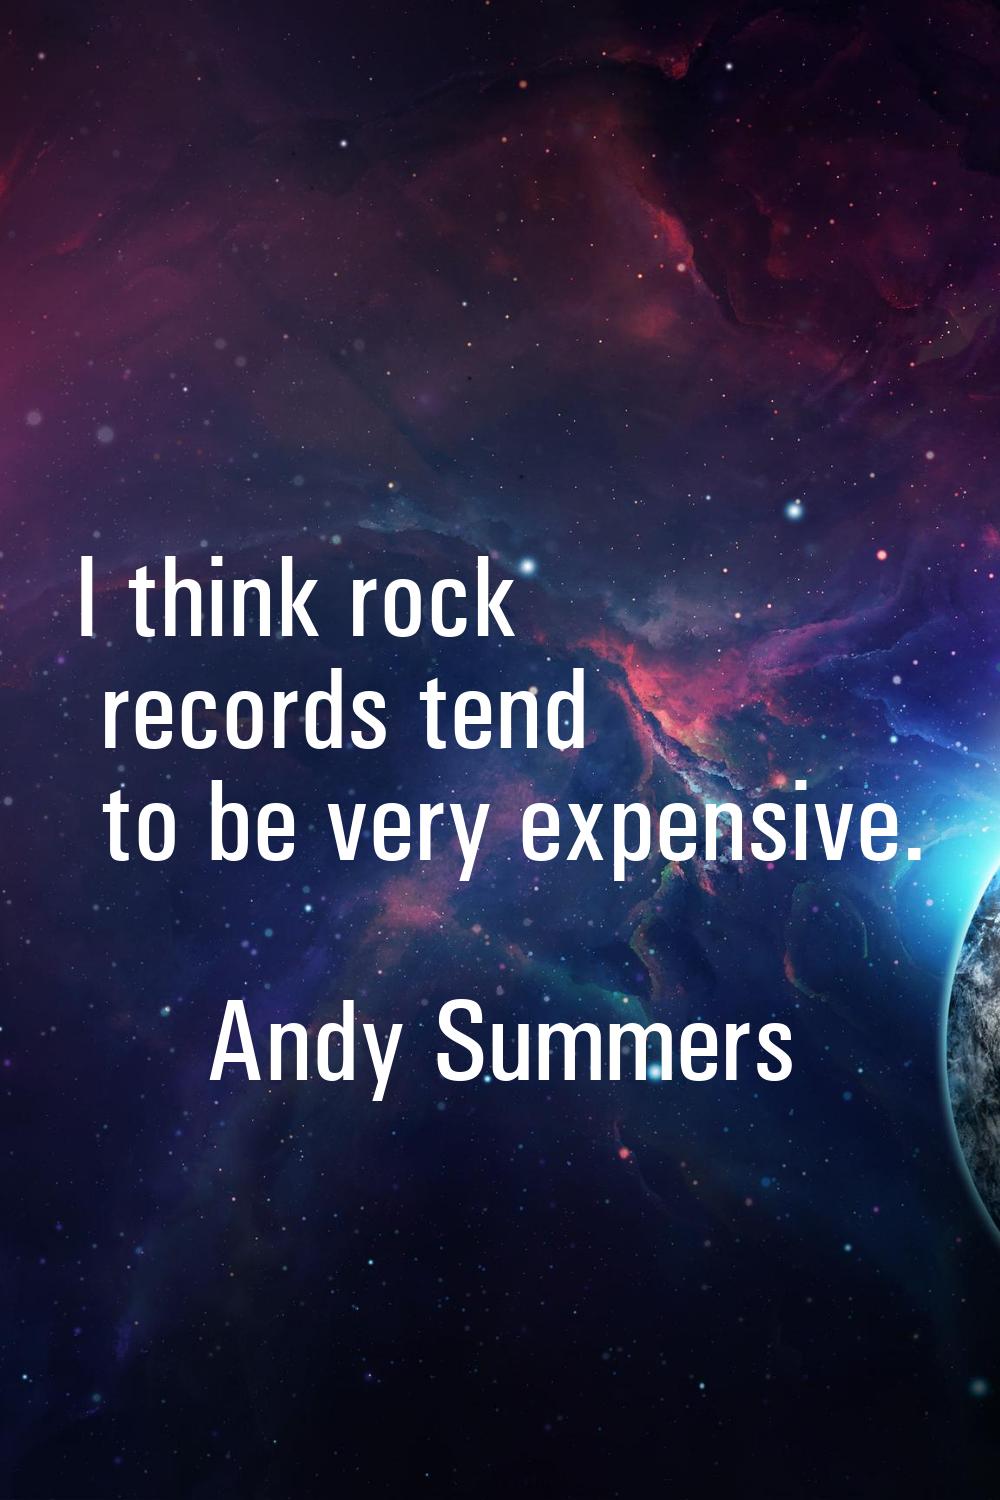 I think rock records tend to be very expensive.